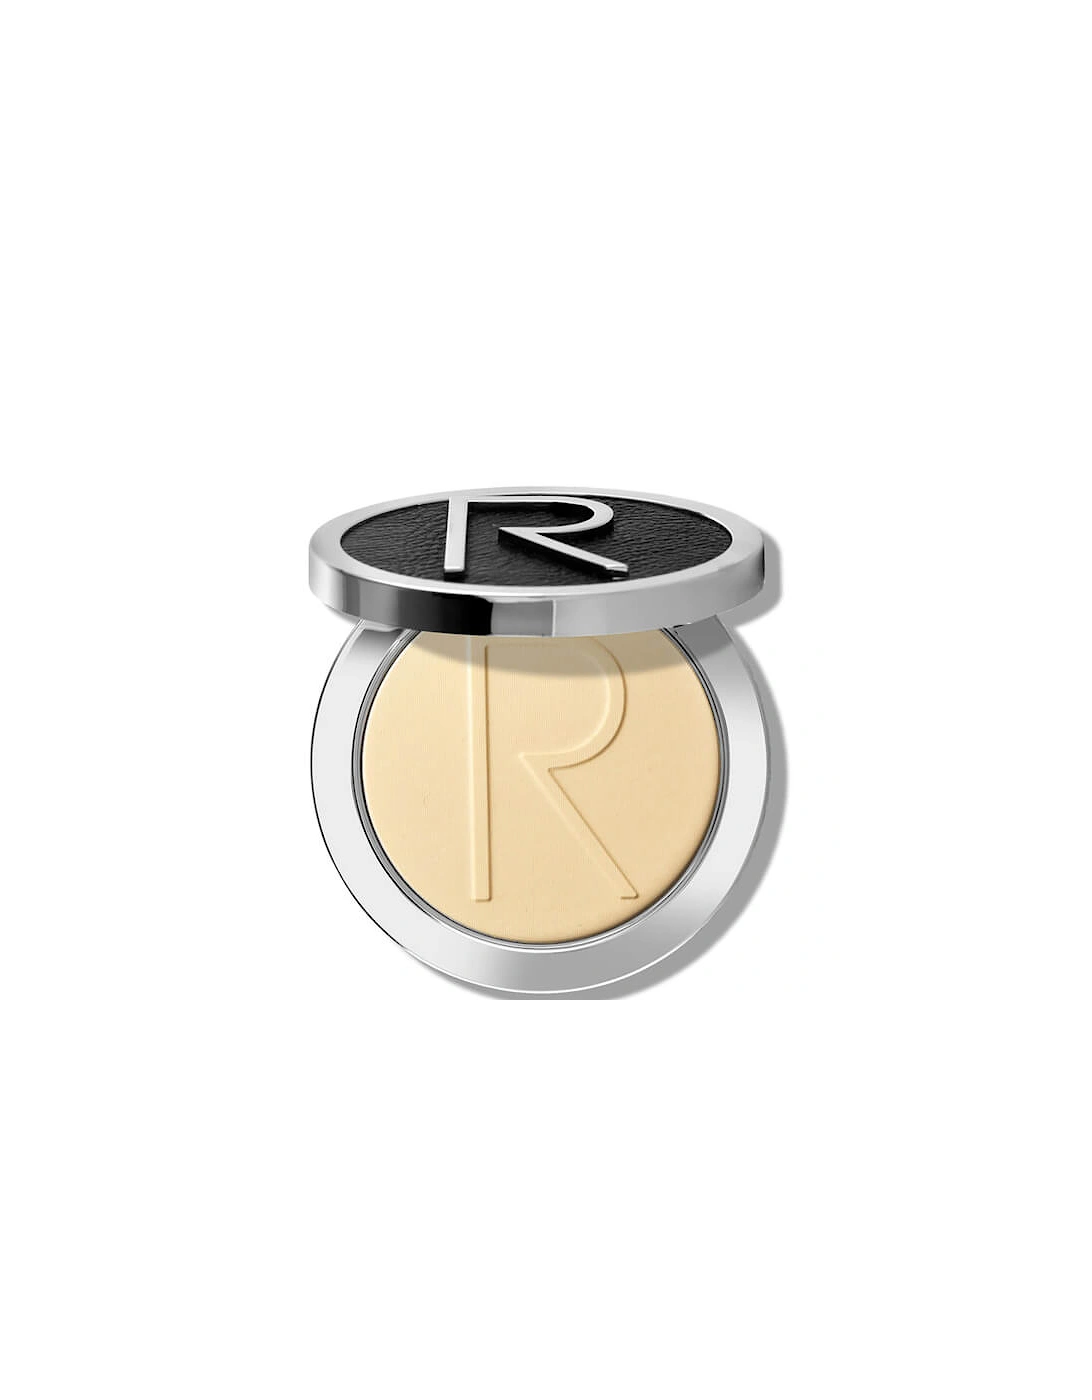 Instaglam Deluxe Banana Powder Compact 8.5g - Rodial, 2 of 1